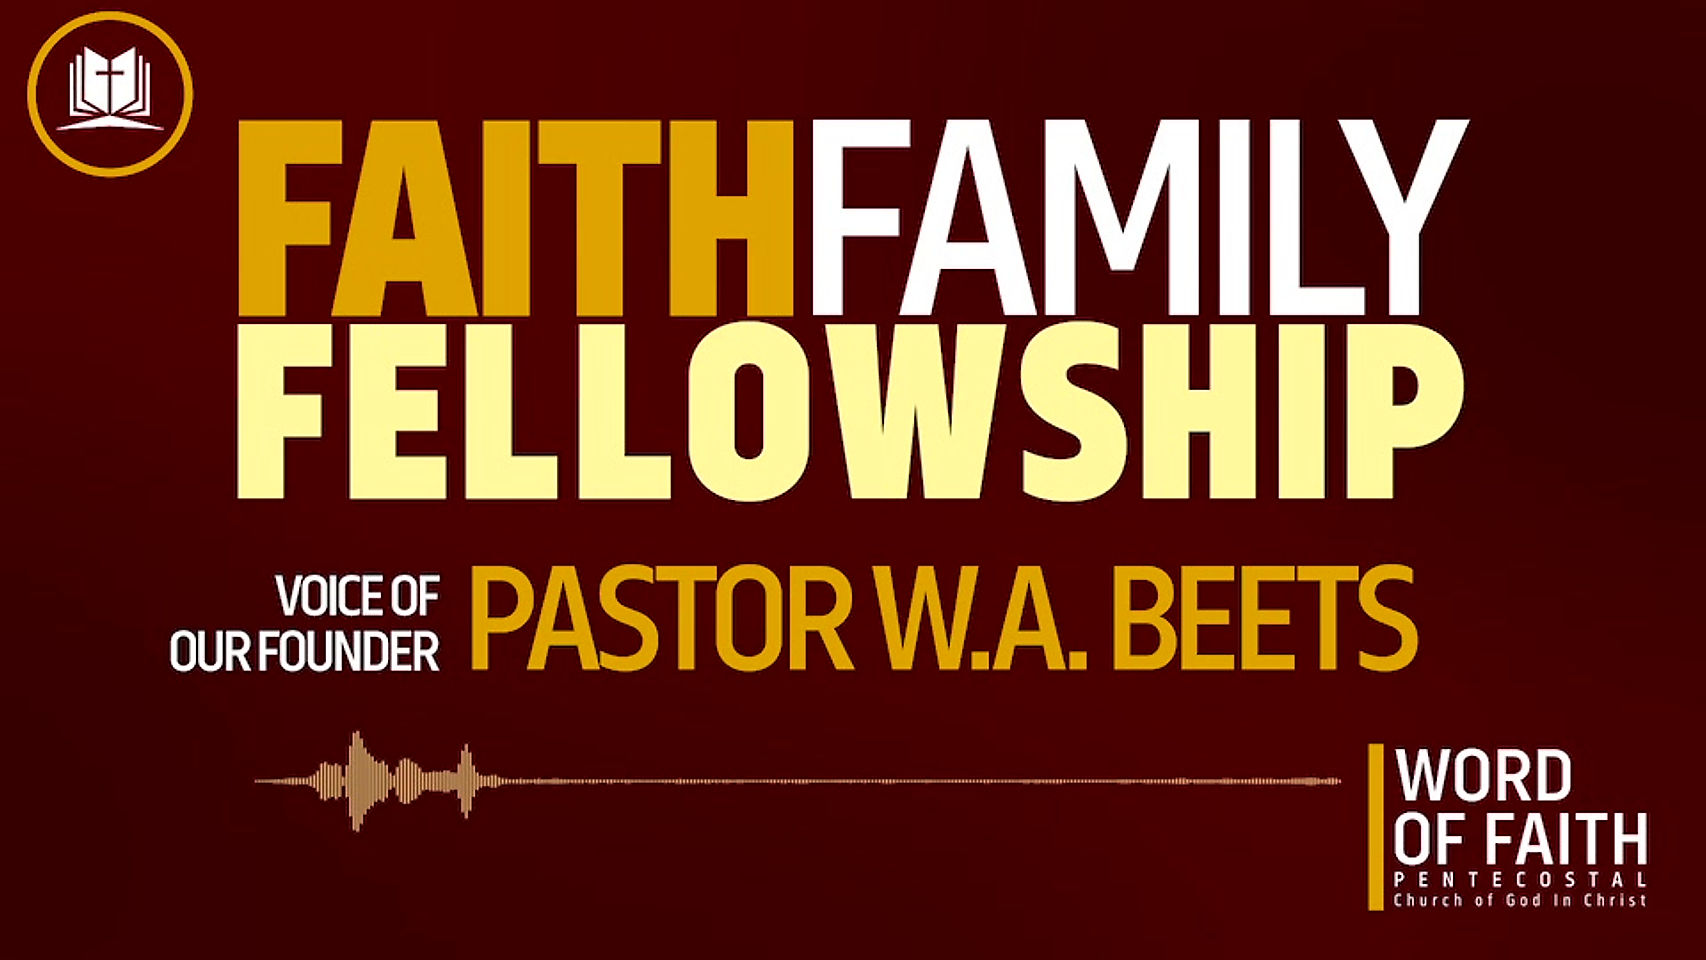 Archive: Pastor Beets W.A. Beets New Years Day Sermon